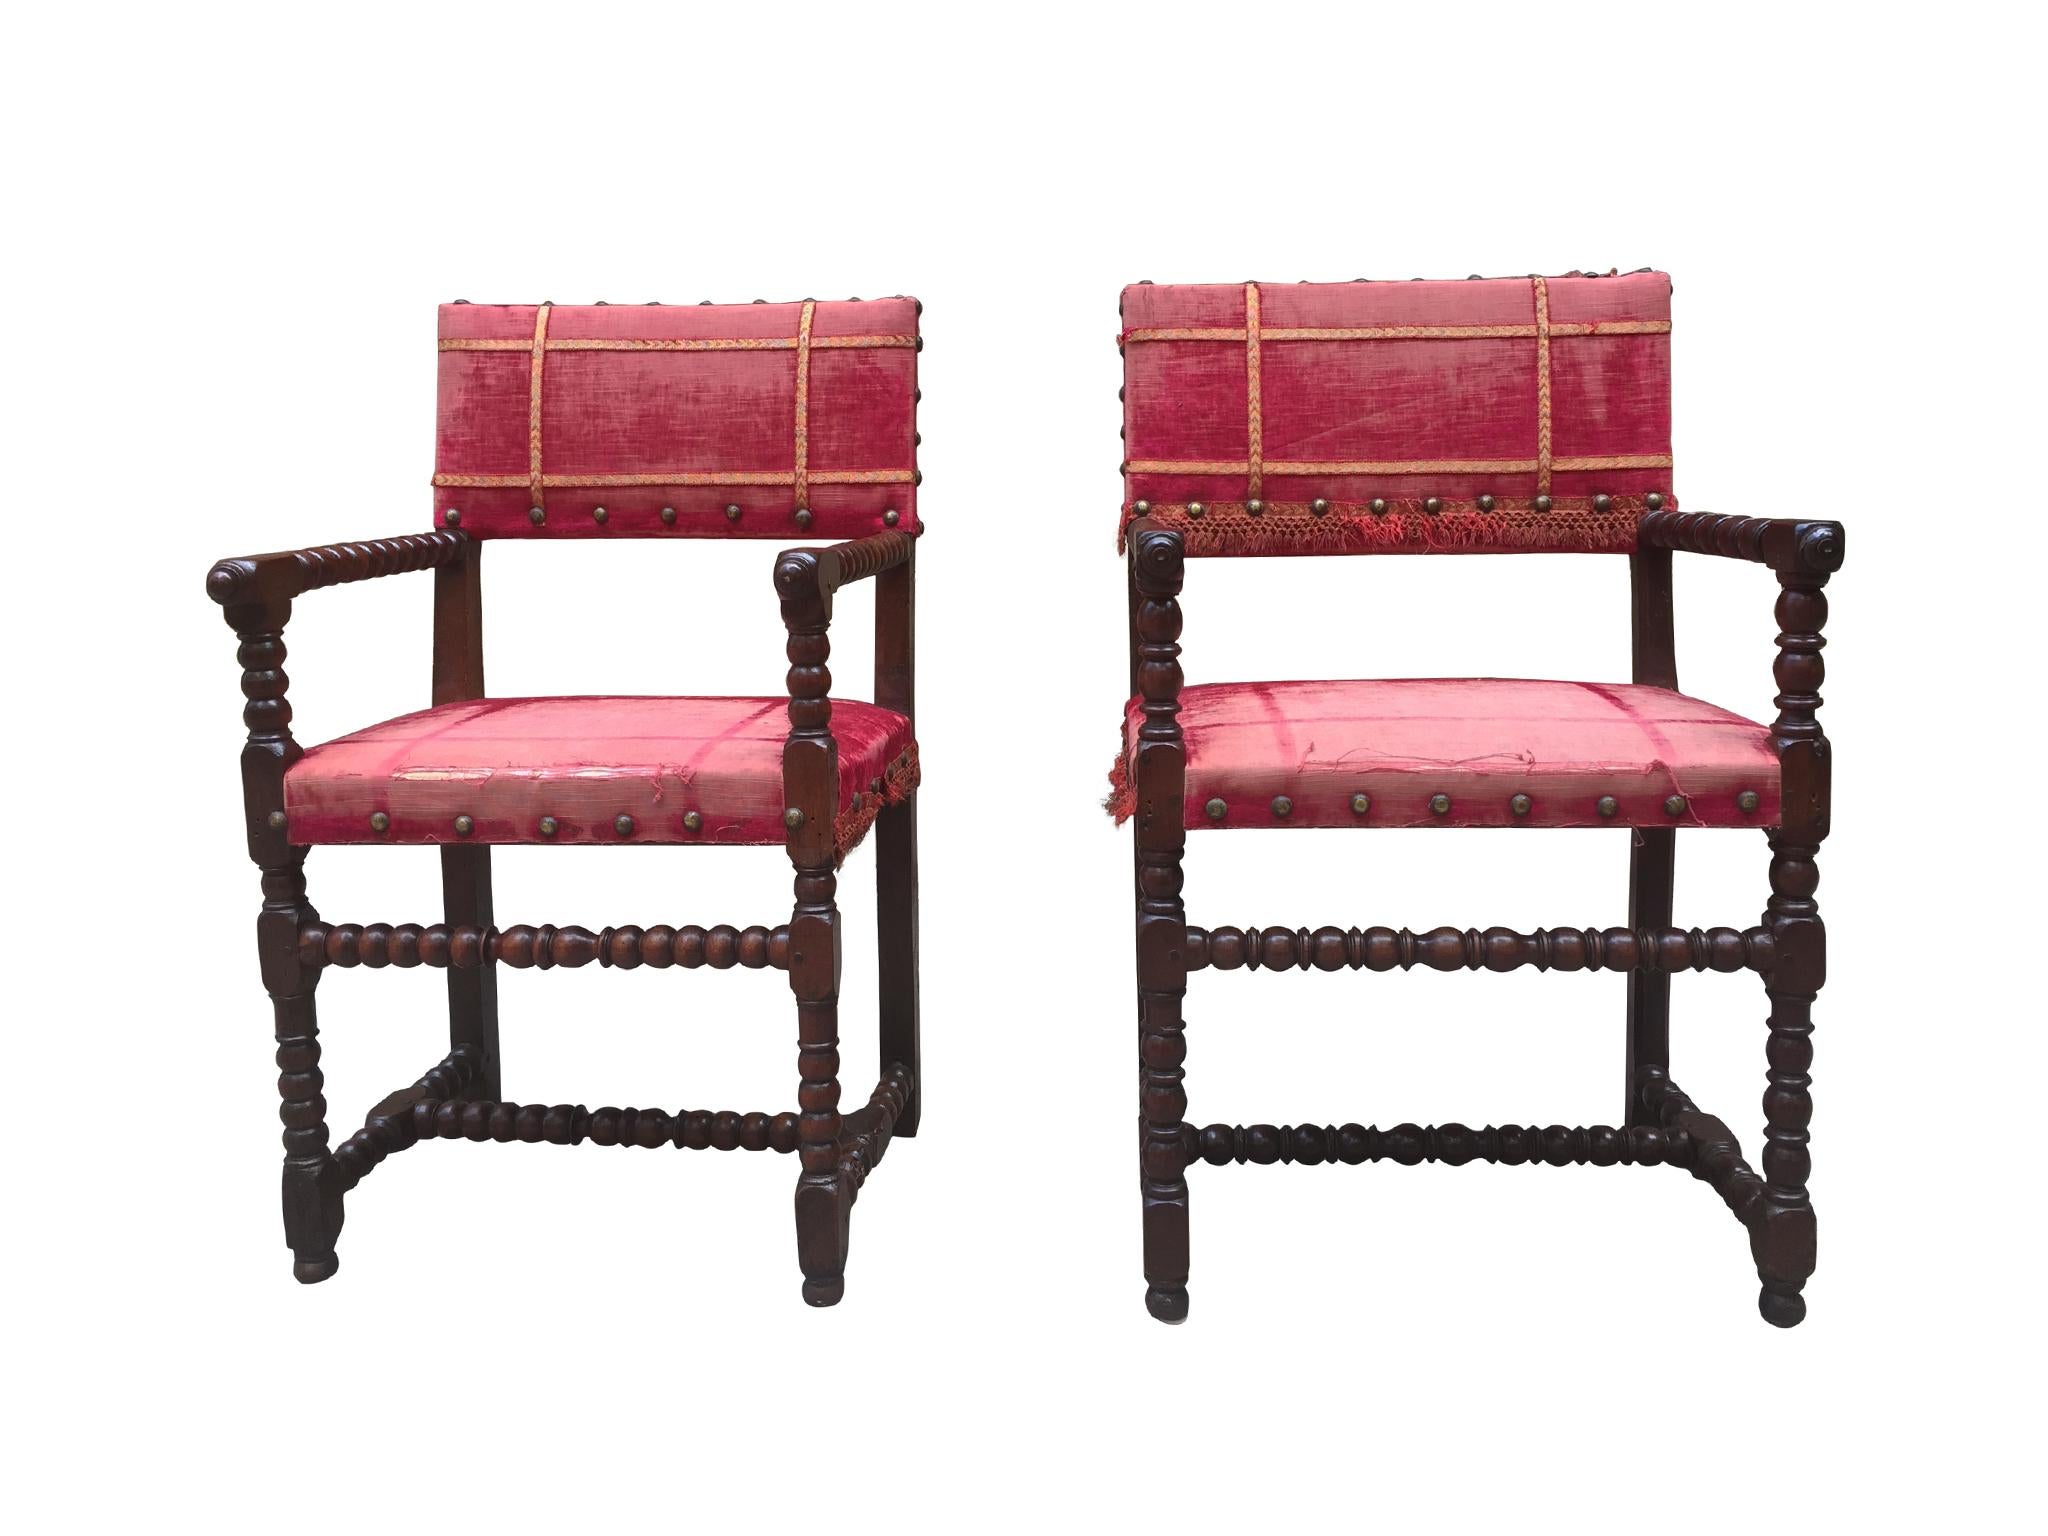 A near-pair set of armchairs in the Baroque-style. 19th century with later additions. The chairs are comprised of walnut wood frame and red velvet upholstery, with yellow grosgrain & studded brass details. The construction of the chairs is a Classic